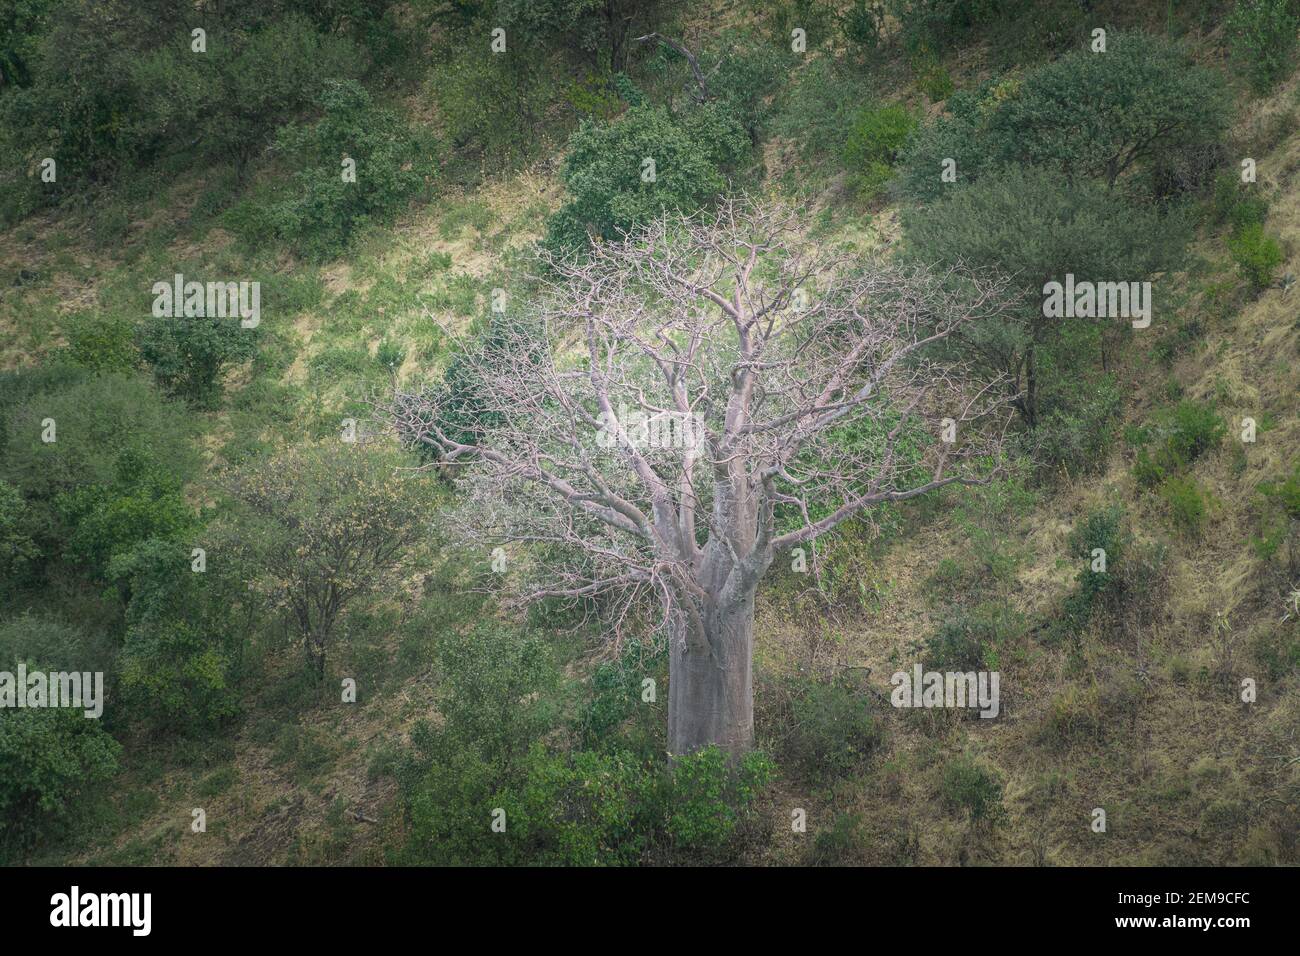 Baobab isolated in the middle of the forest, on a mountain slope. Arusha, Tanzania. Africa. Stock Photo